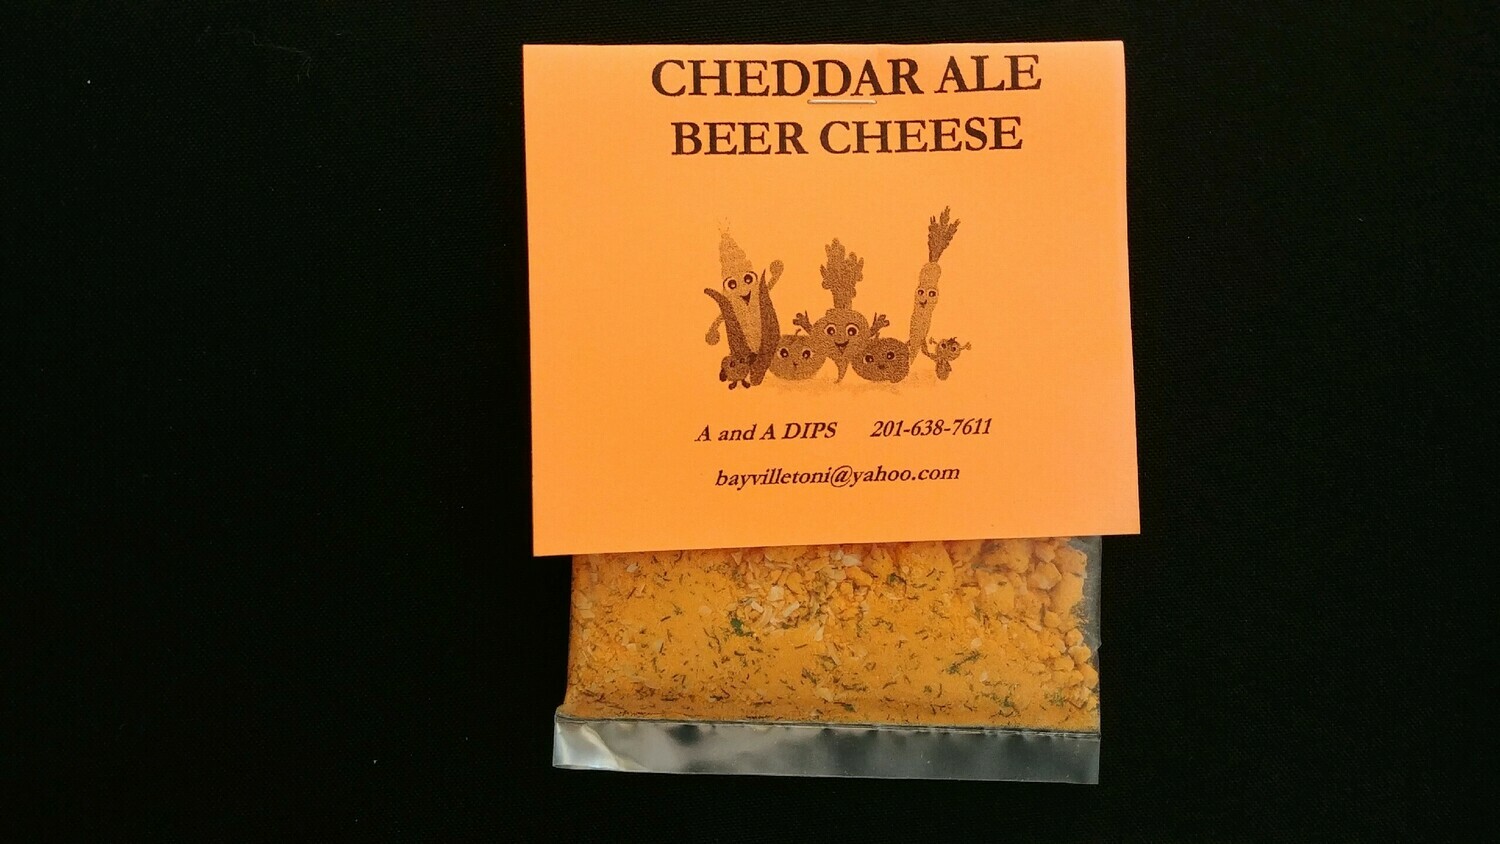 CHEDDAR ALE BEER CHEESE